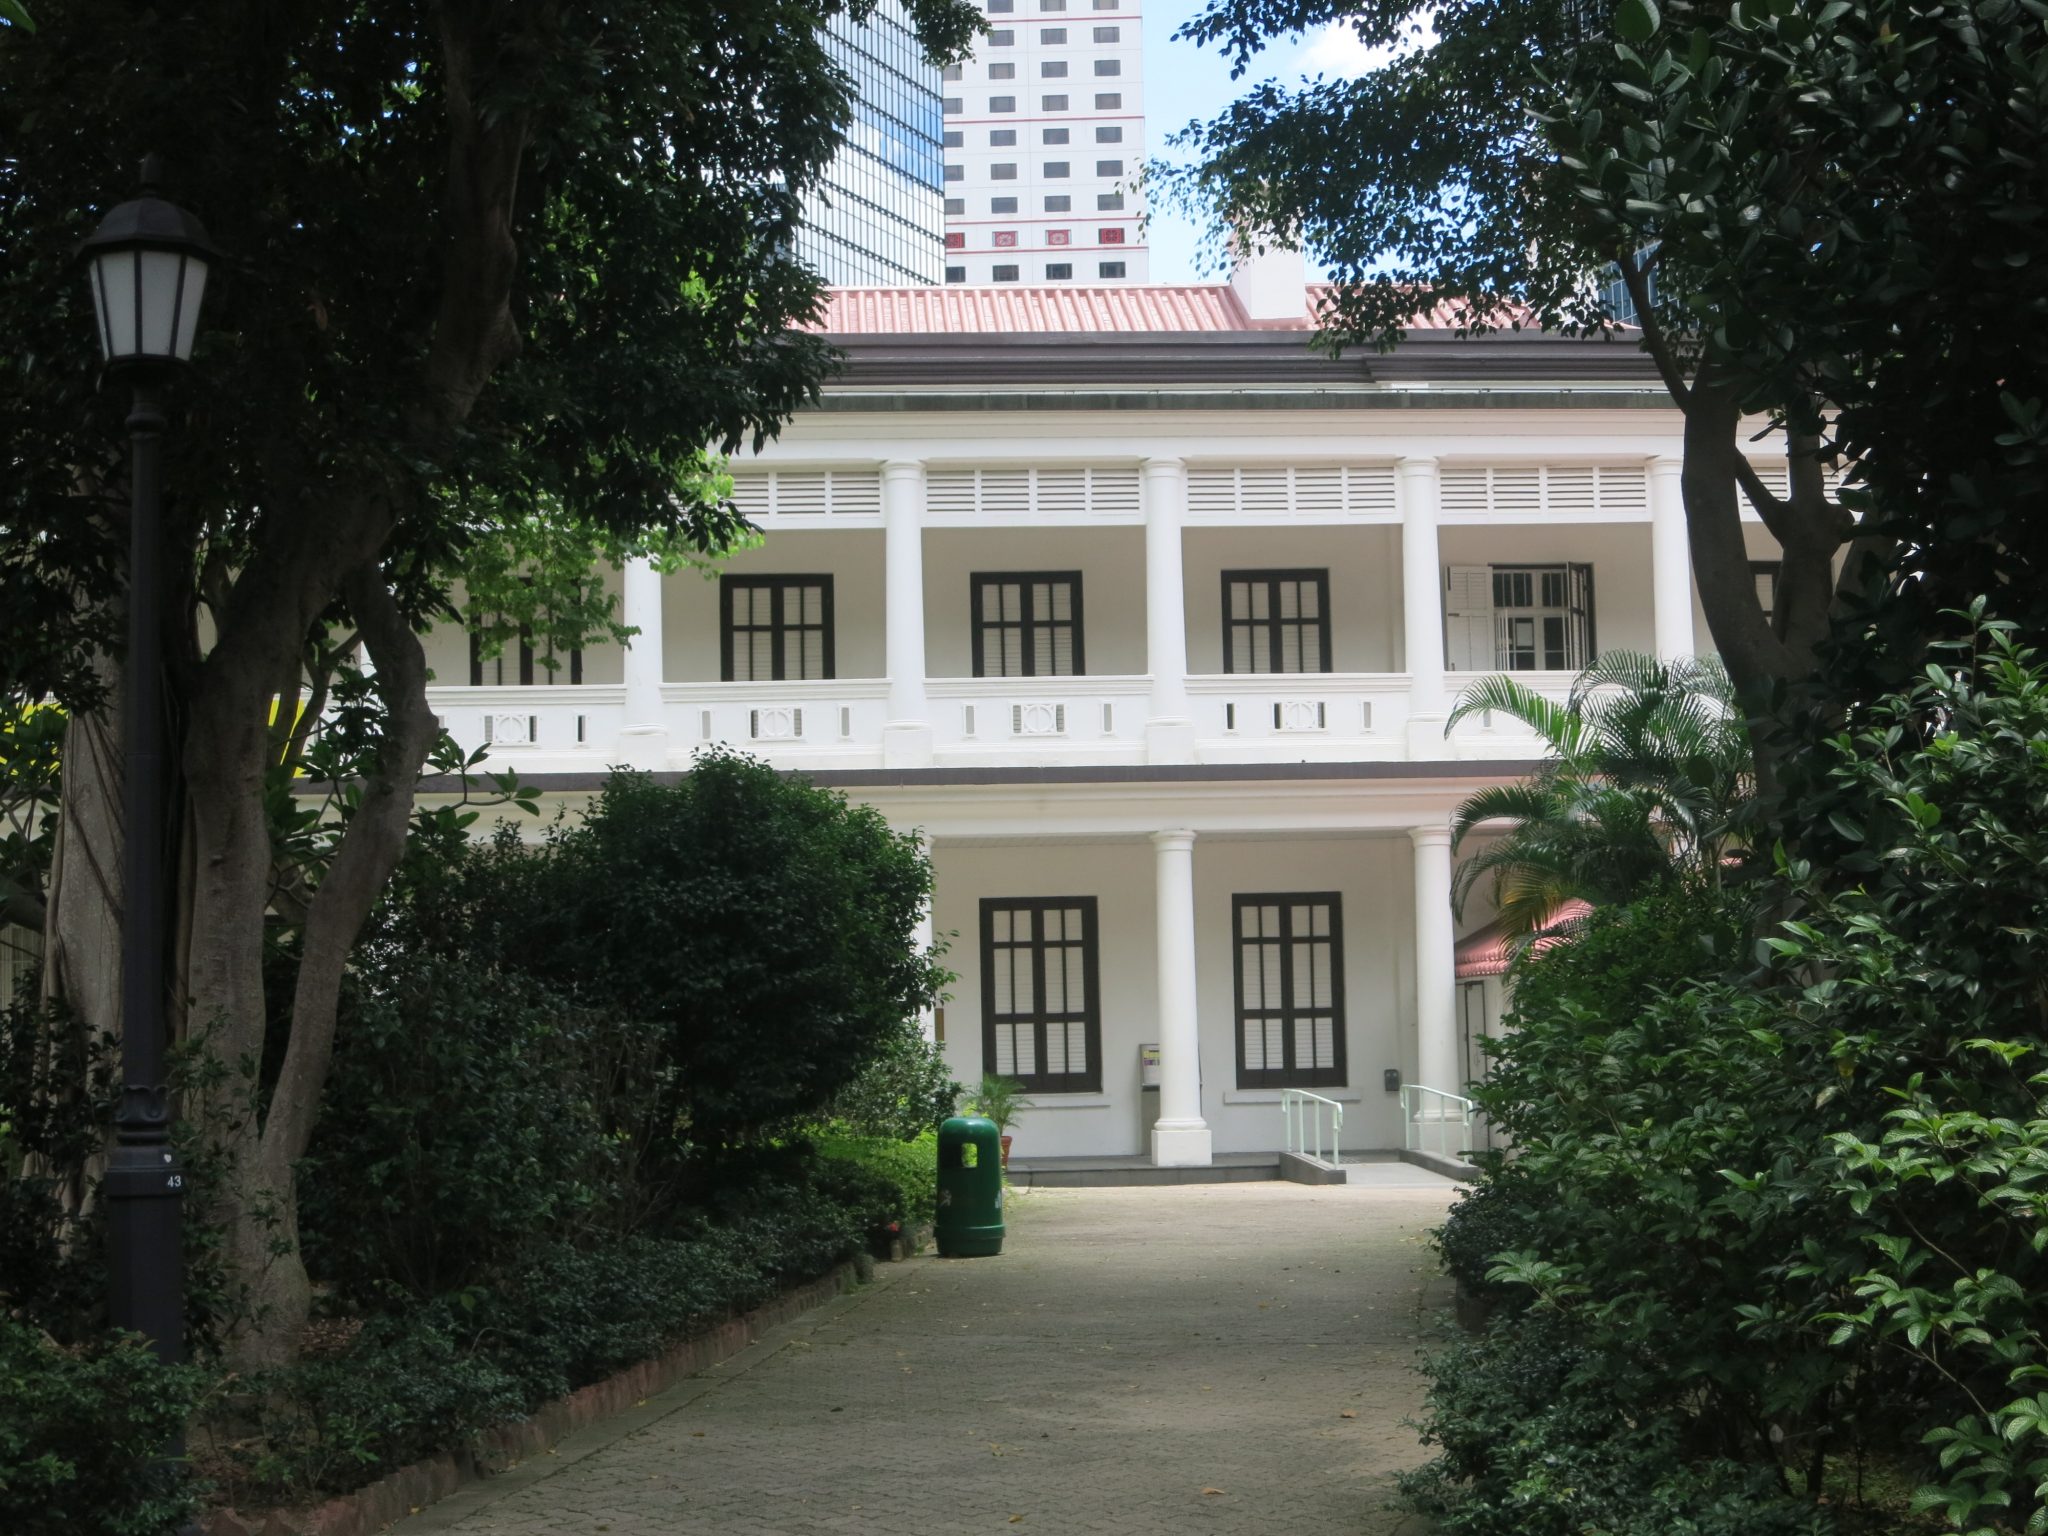 a view of the front of the colonial-era Flagstaff House in Hong Kong Park